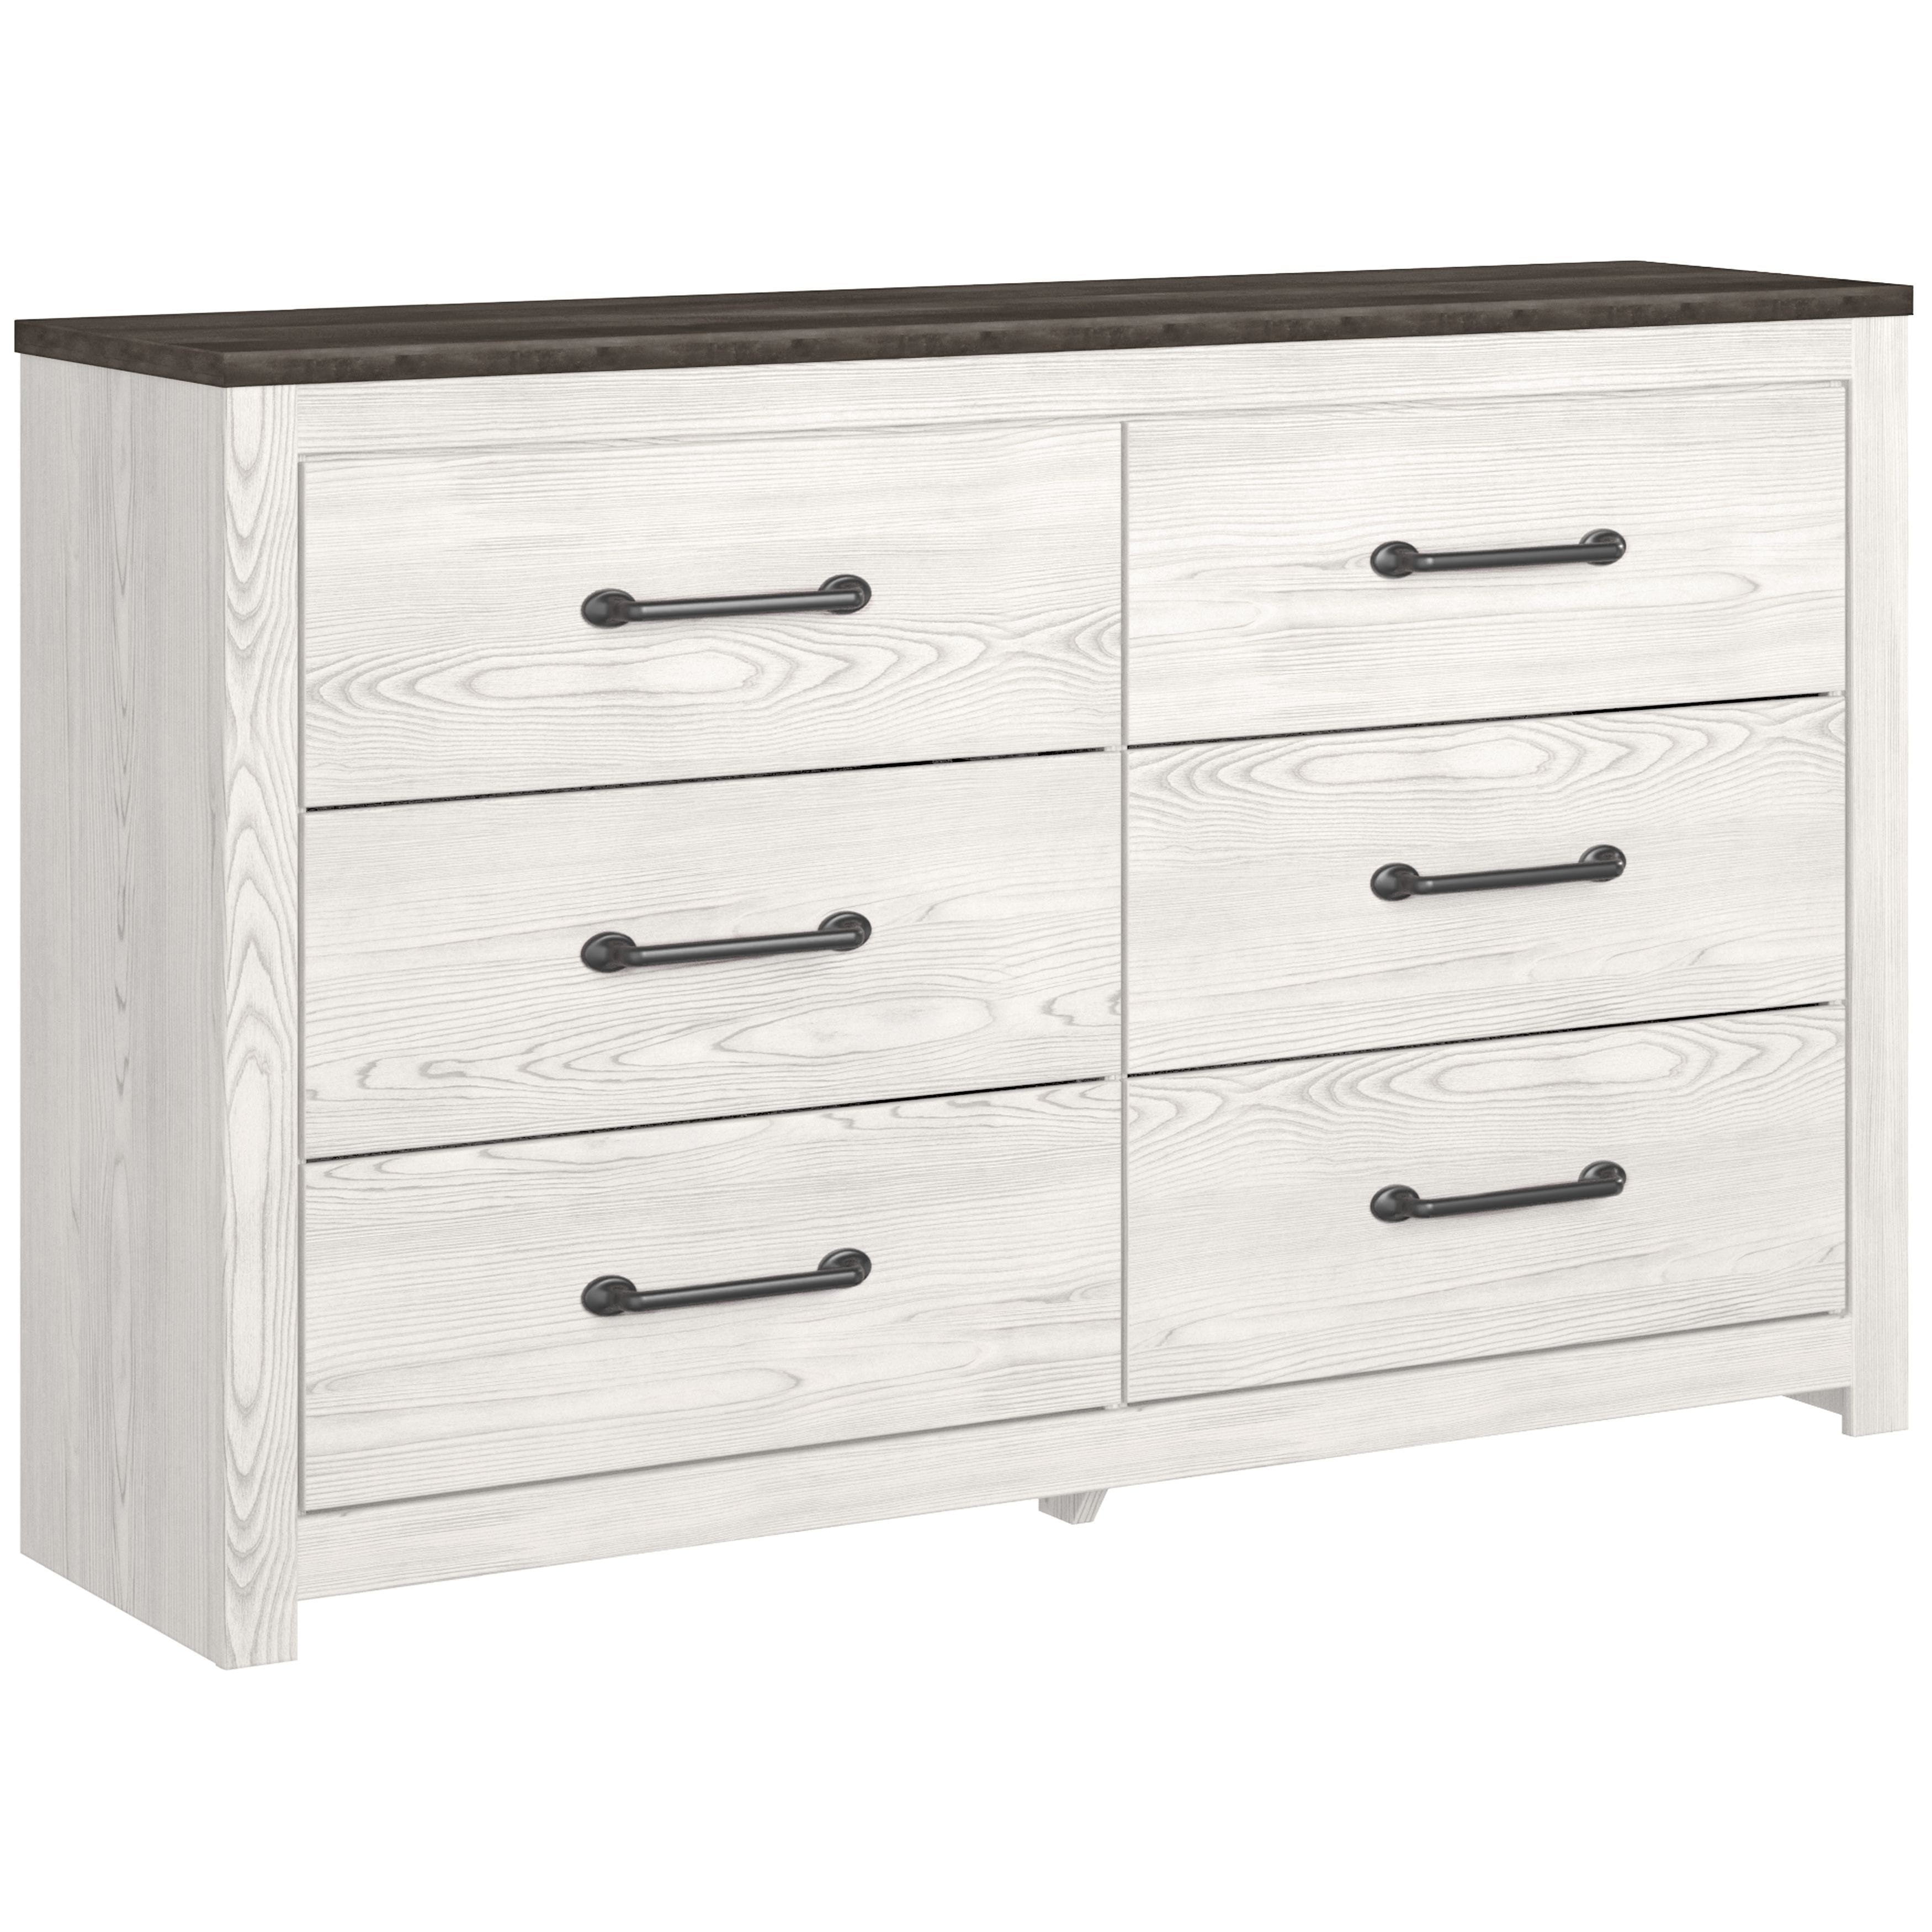 https://istylenew.gumlet.io/images/products/ashley-furniture-b1190-31-36-71-96-922-gerridan-white-gray-6-pc-queen-panel-bed-2-_2.jpg